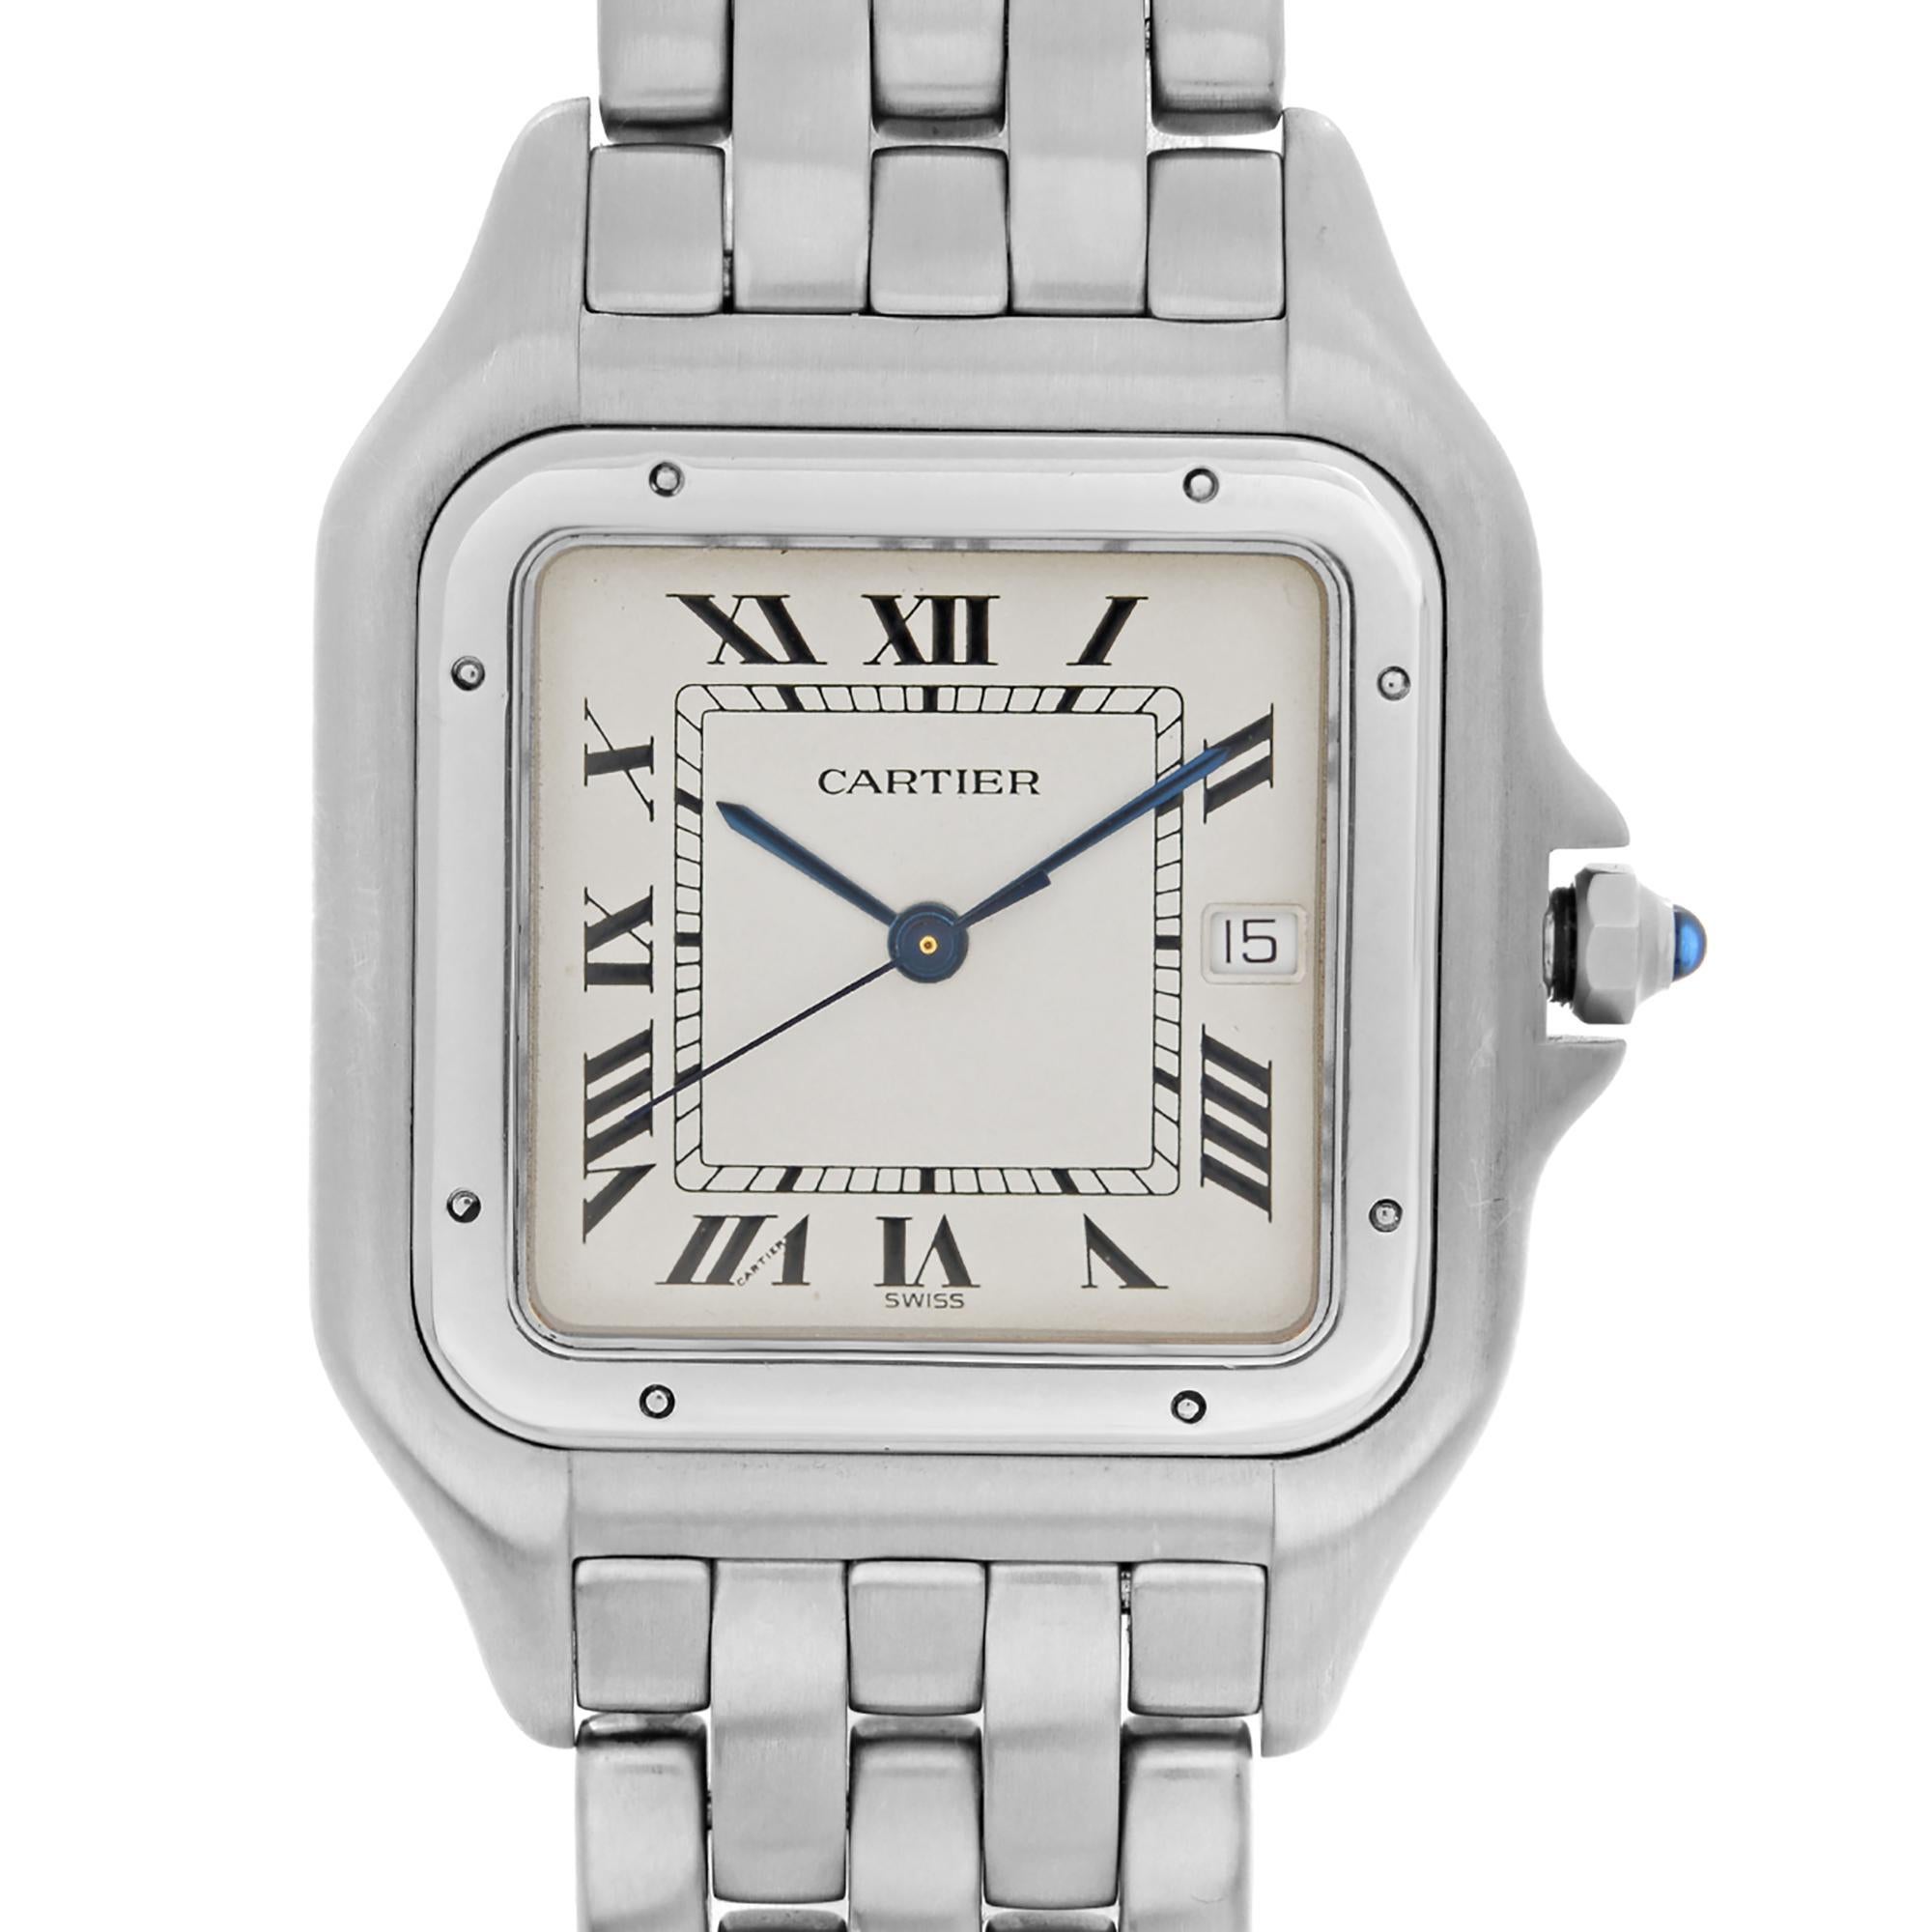 Pre-owned Cartier Panthere 29mm Quartz Unisex Watch W25032P5. The Watch has Minor Blemishes on the Dial and Tiny Scratches on the Crystal Visible Under Close Inspection. This Beautiful Timepiece is Powered by Quartz (battery) Movement And Features: